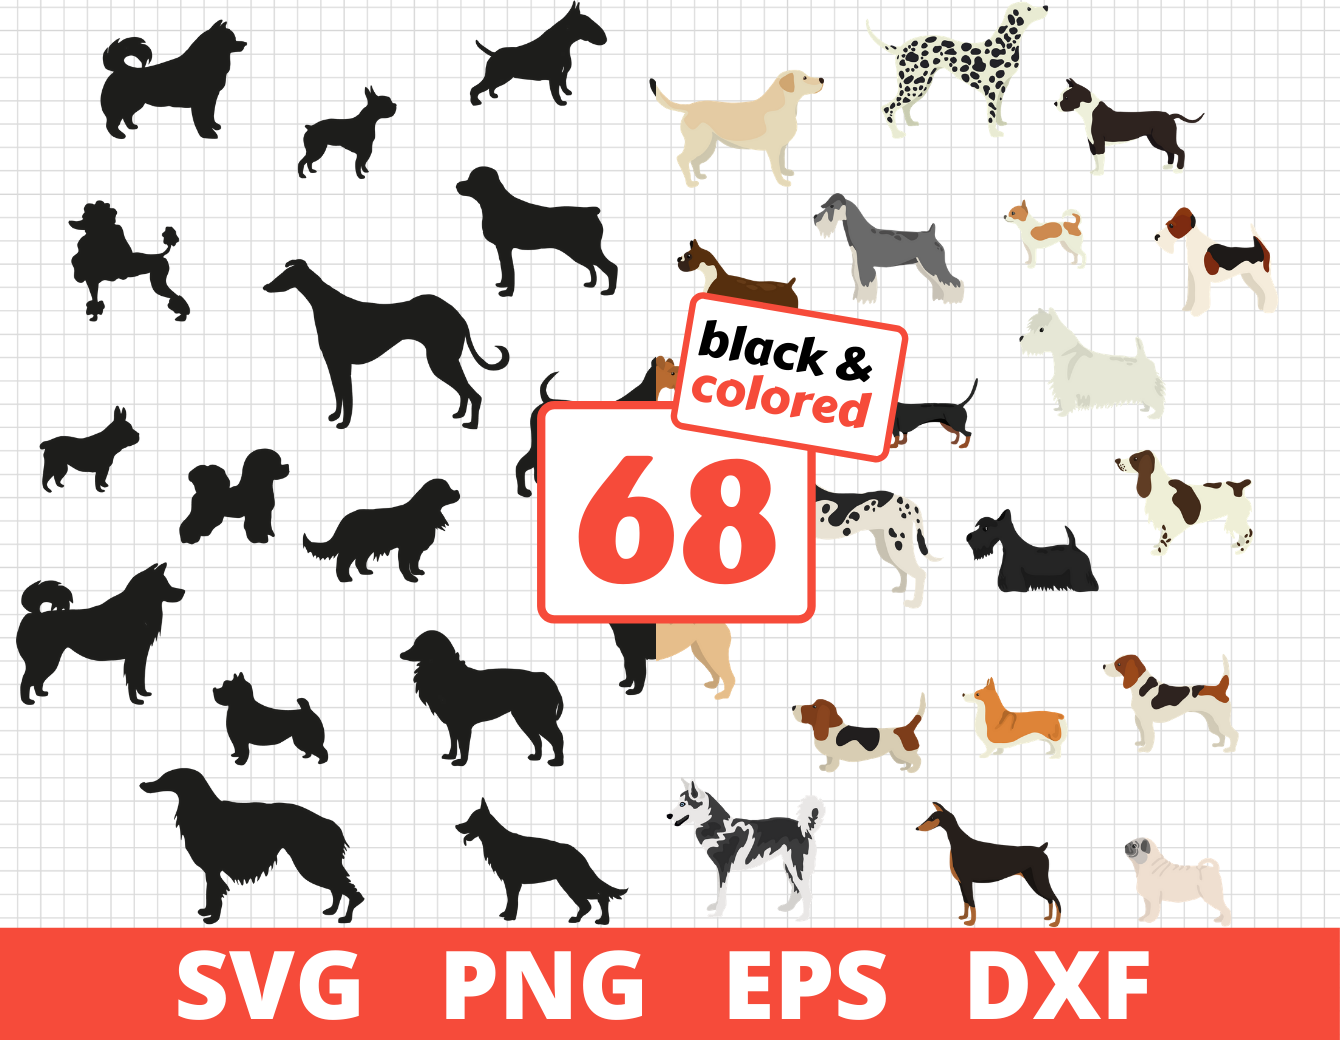 Download Dog Breeds Svg Bundle Colored Silhouette Sketch By Svgocean Thehungryjpeg Com